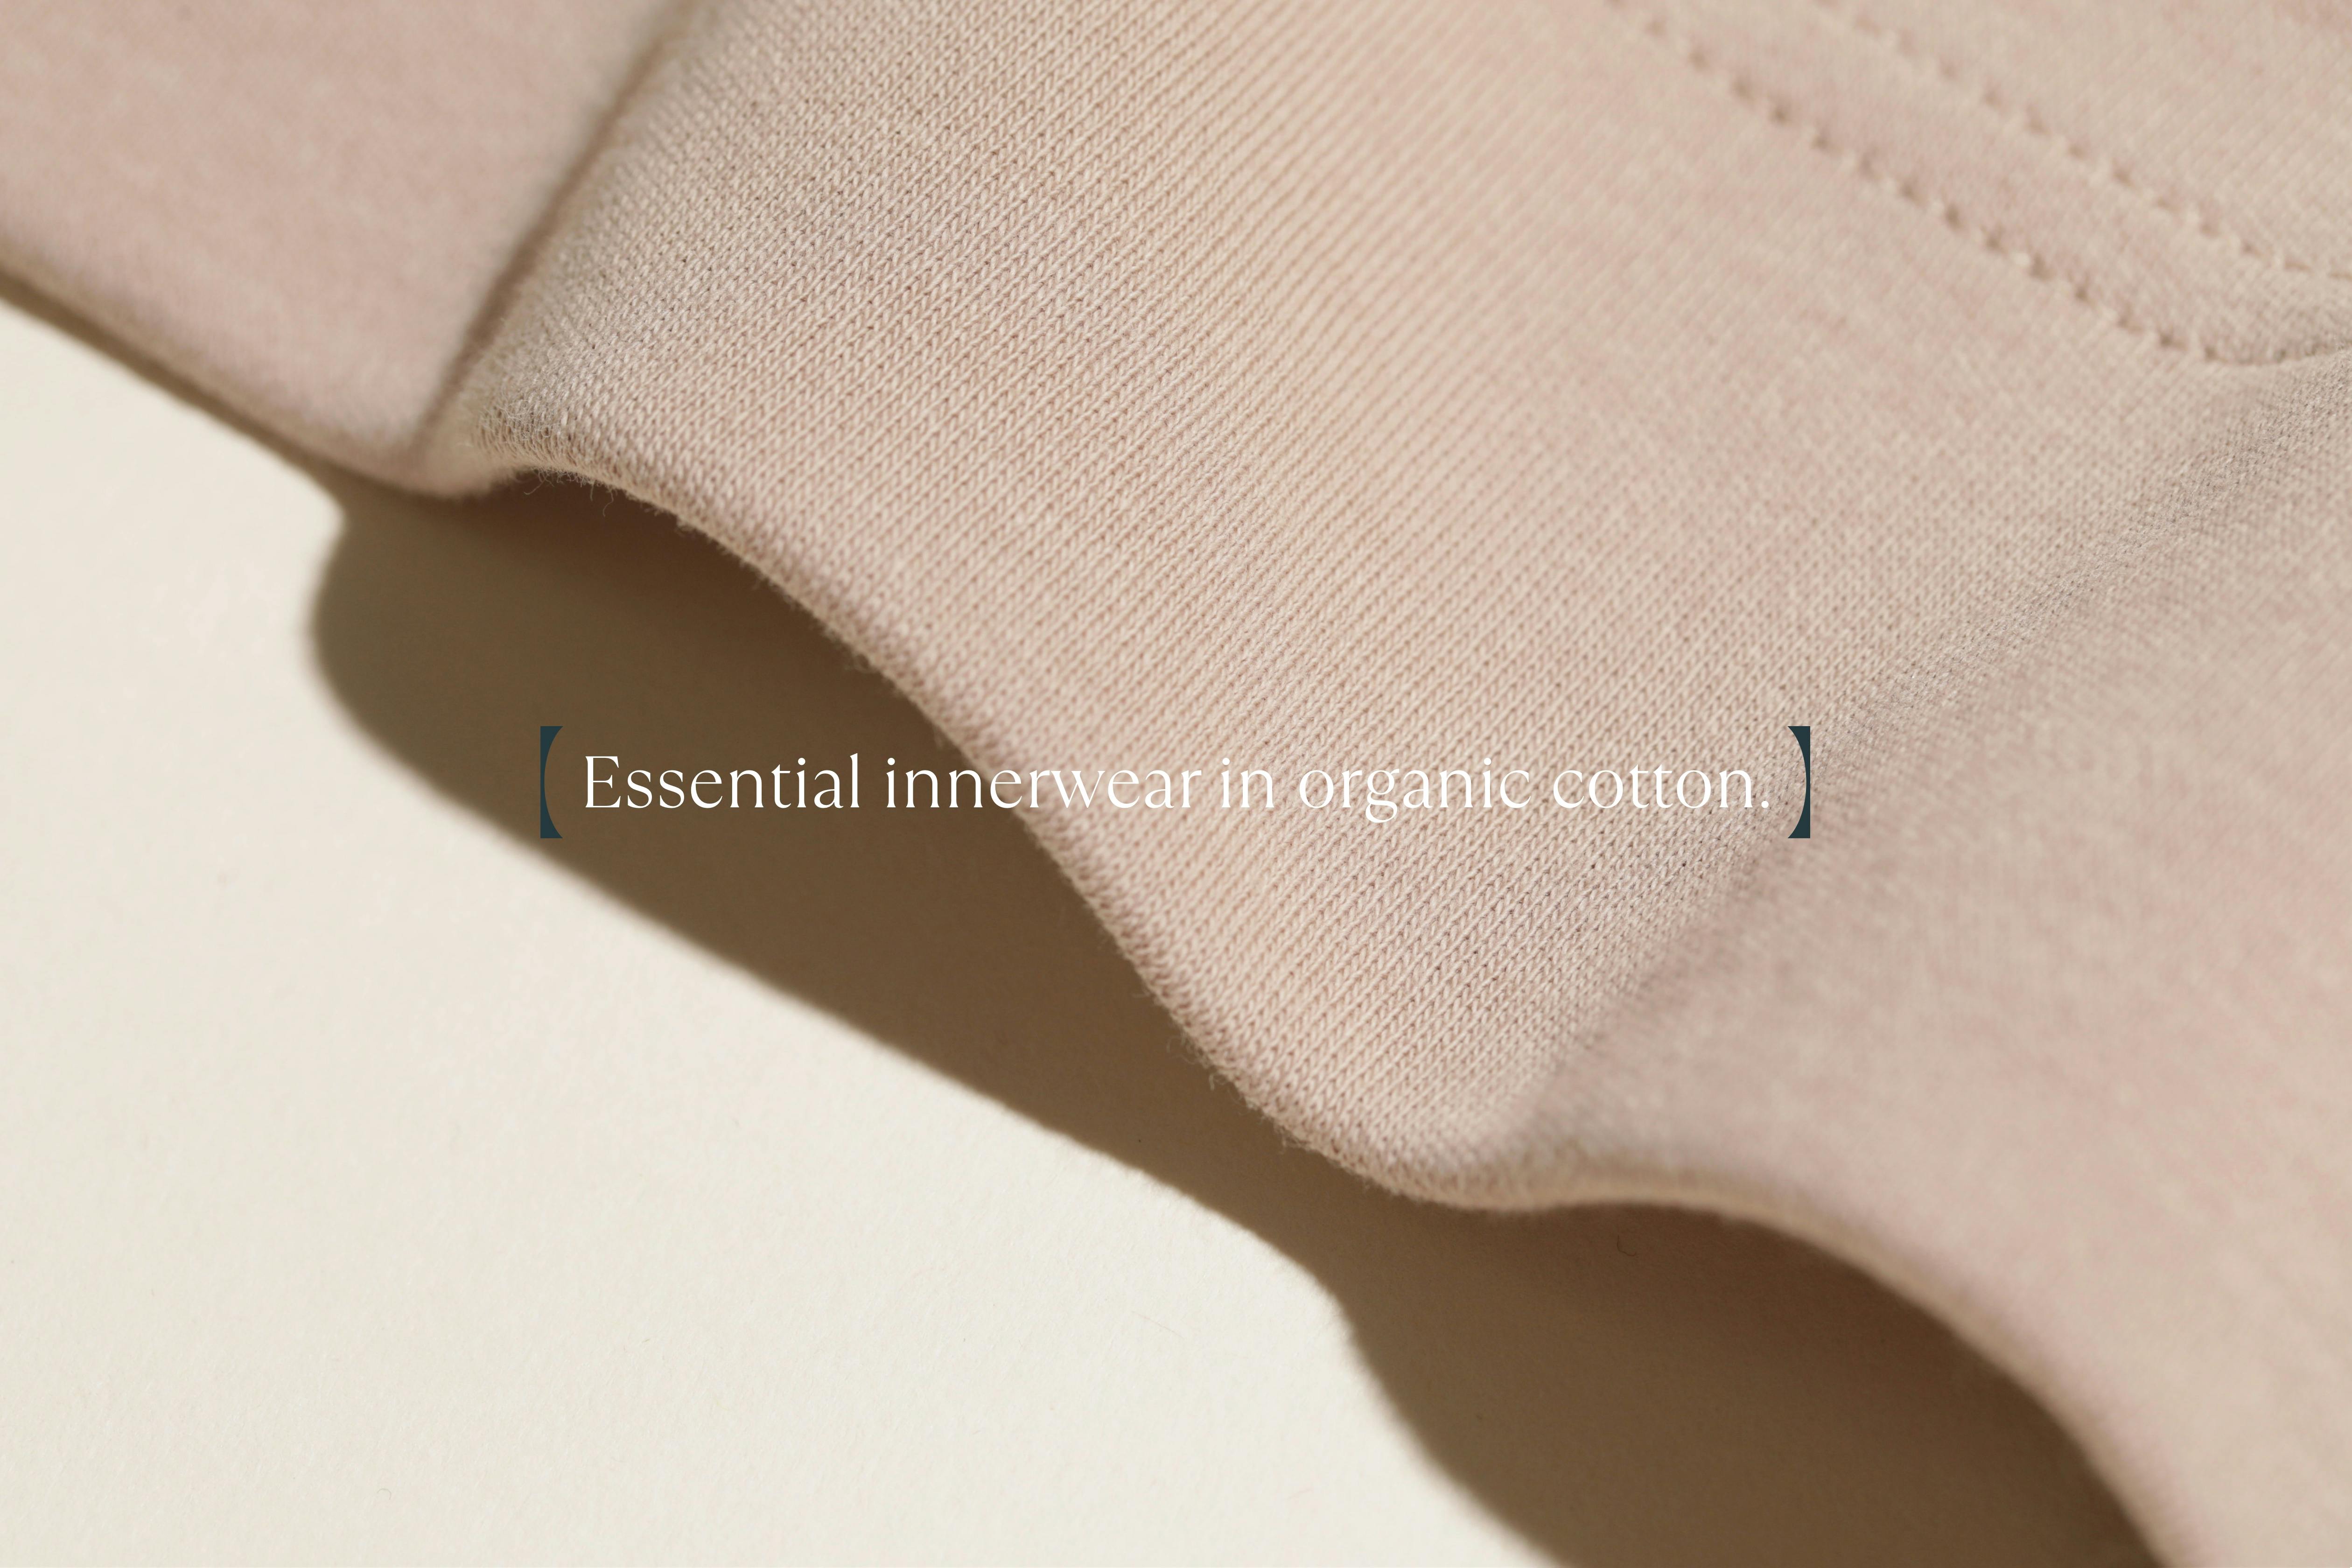 Subset, About, Essential Innerwear in Organic Cotton